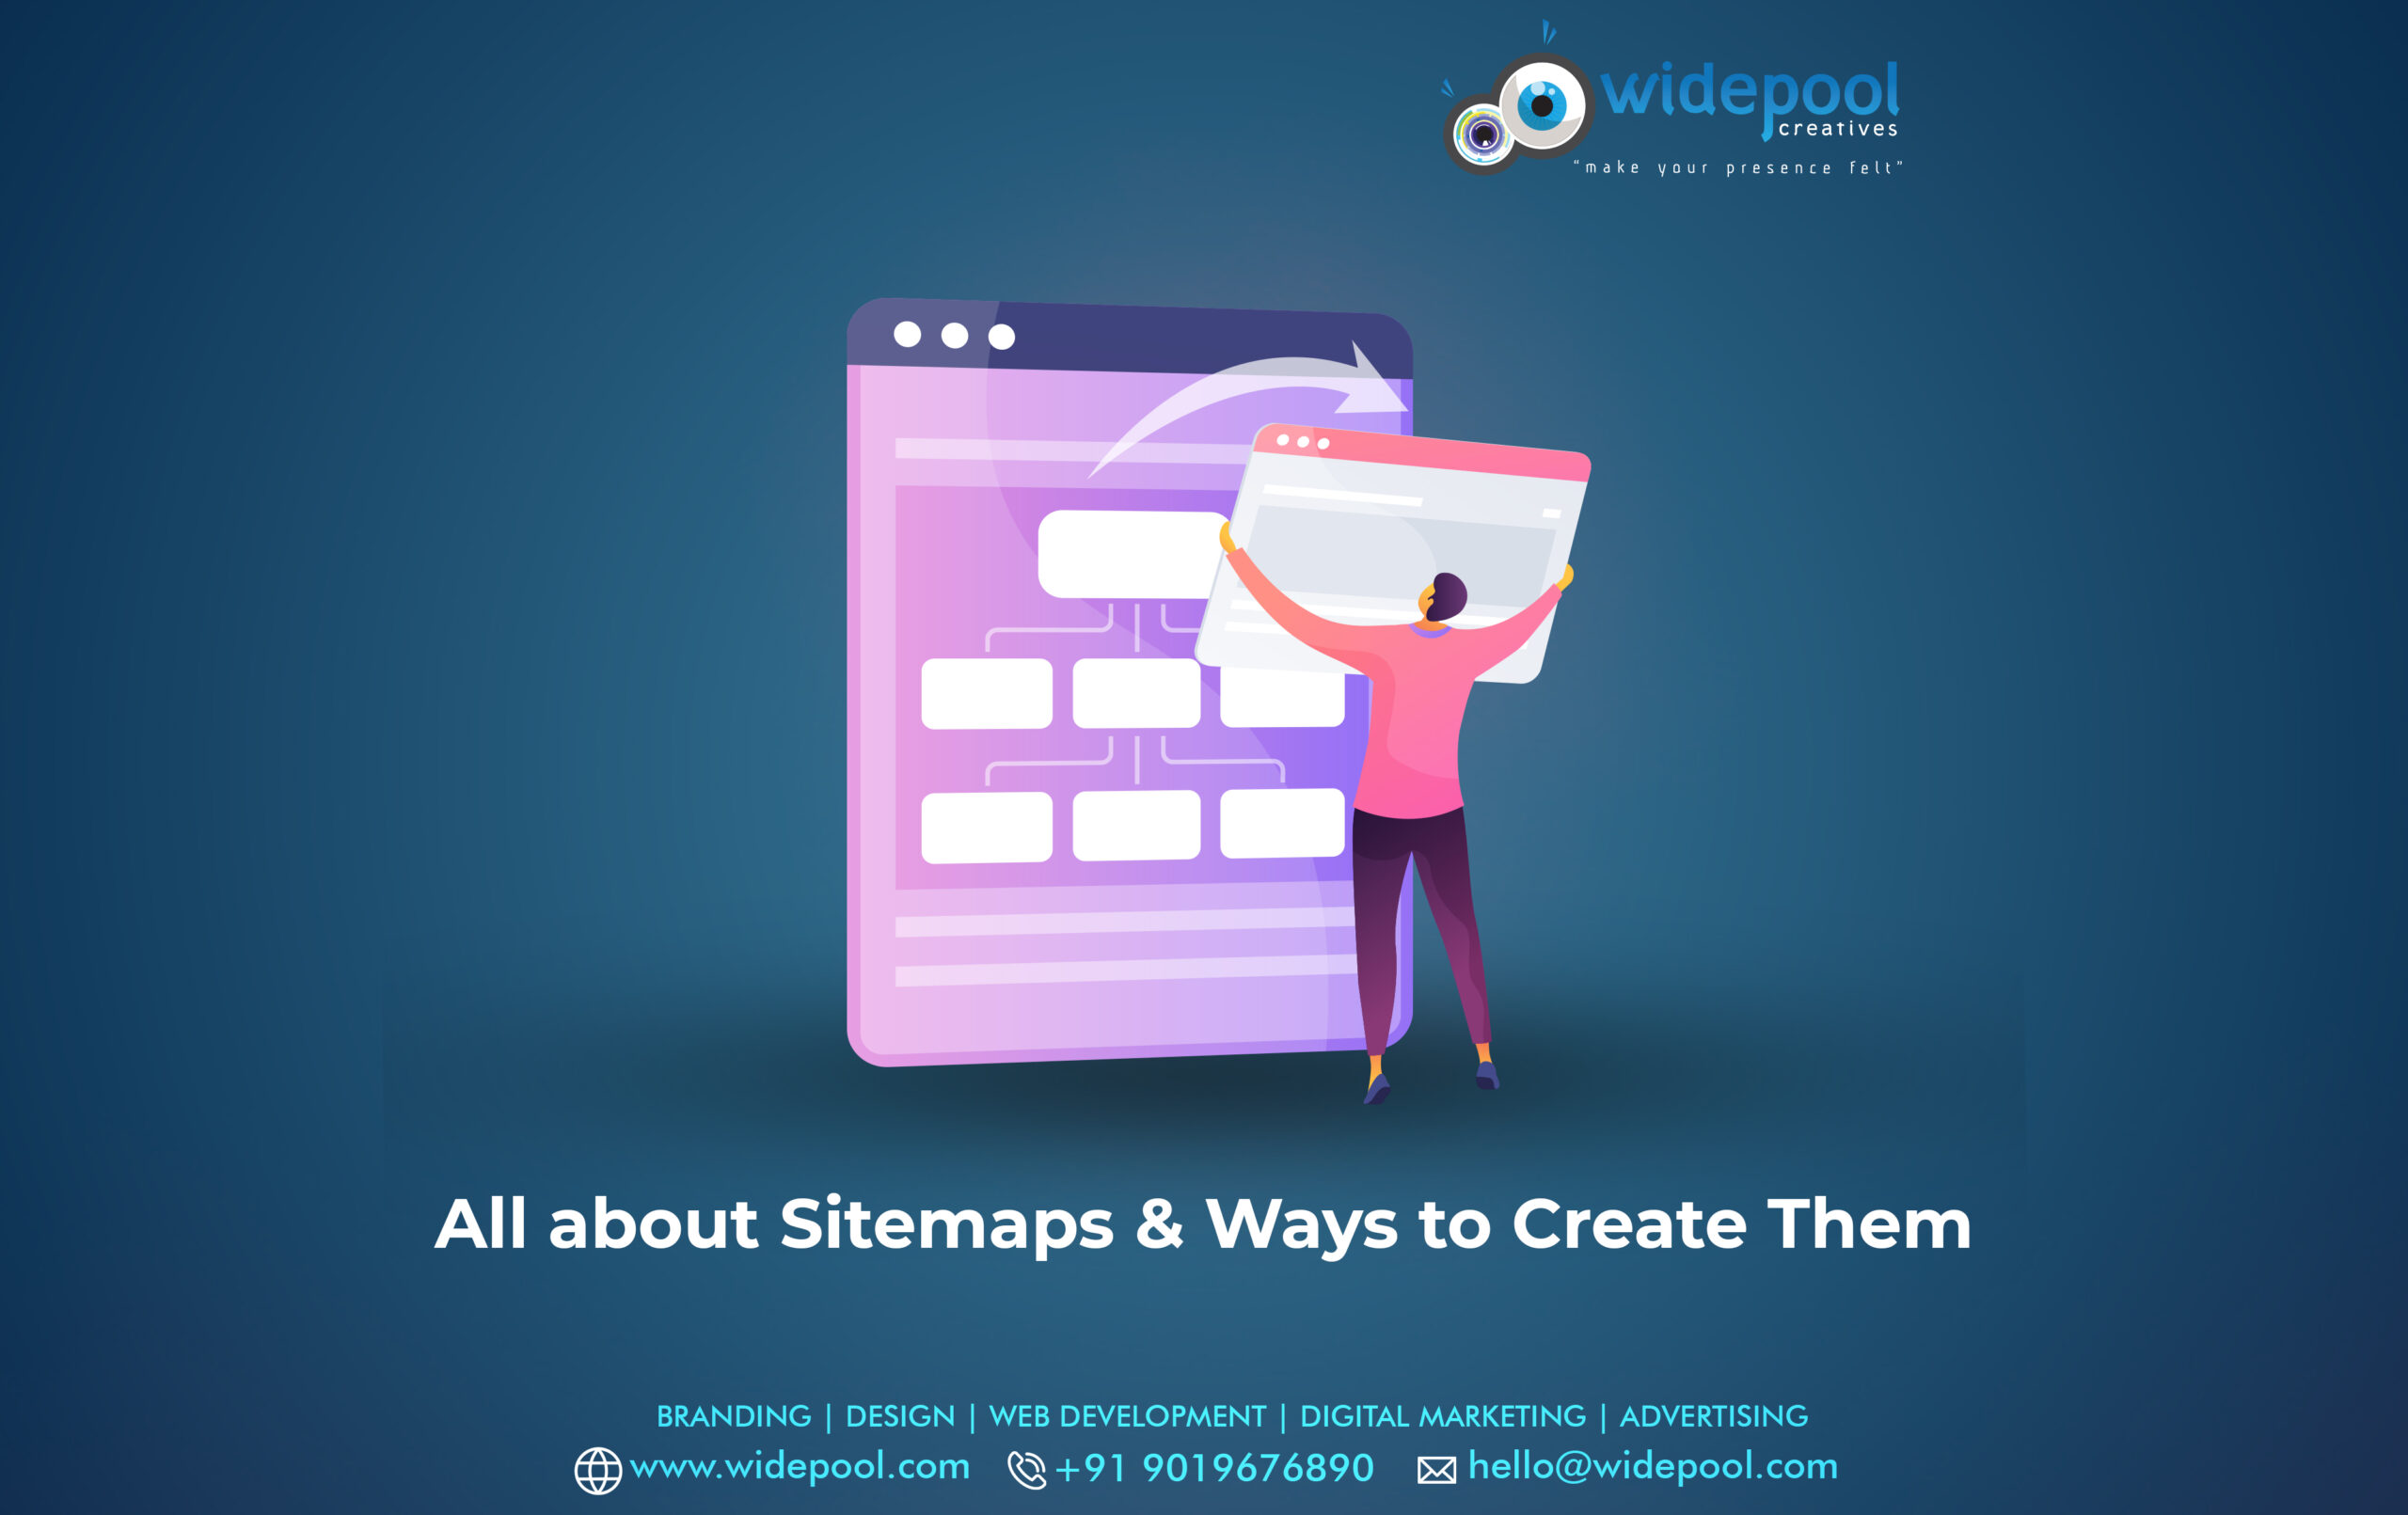 All about Sitemap and Ways to Create Them